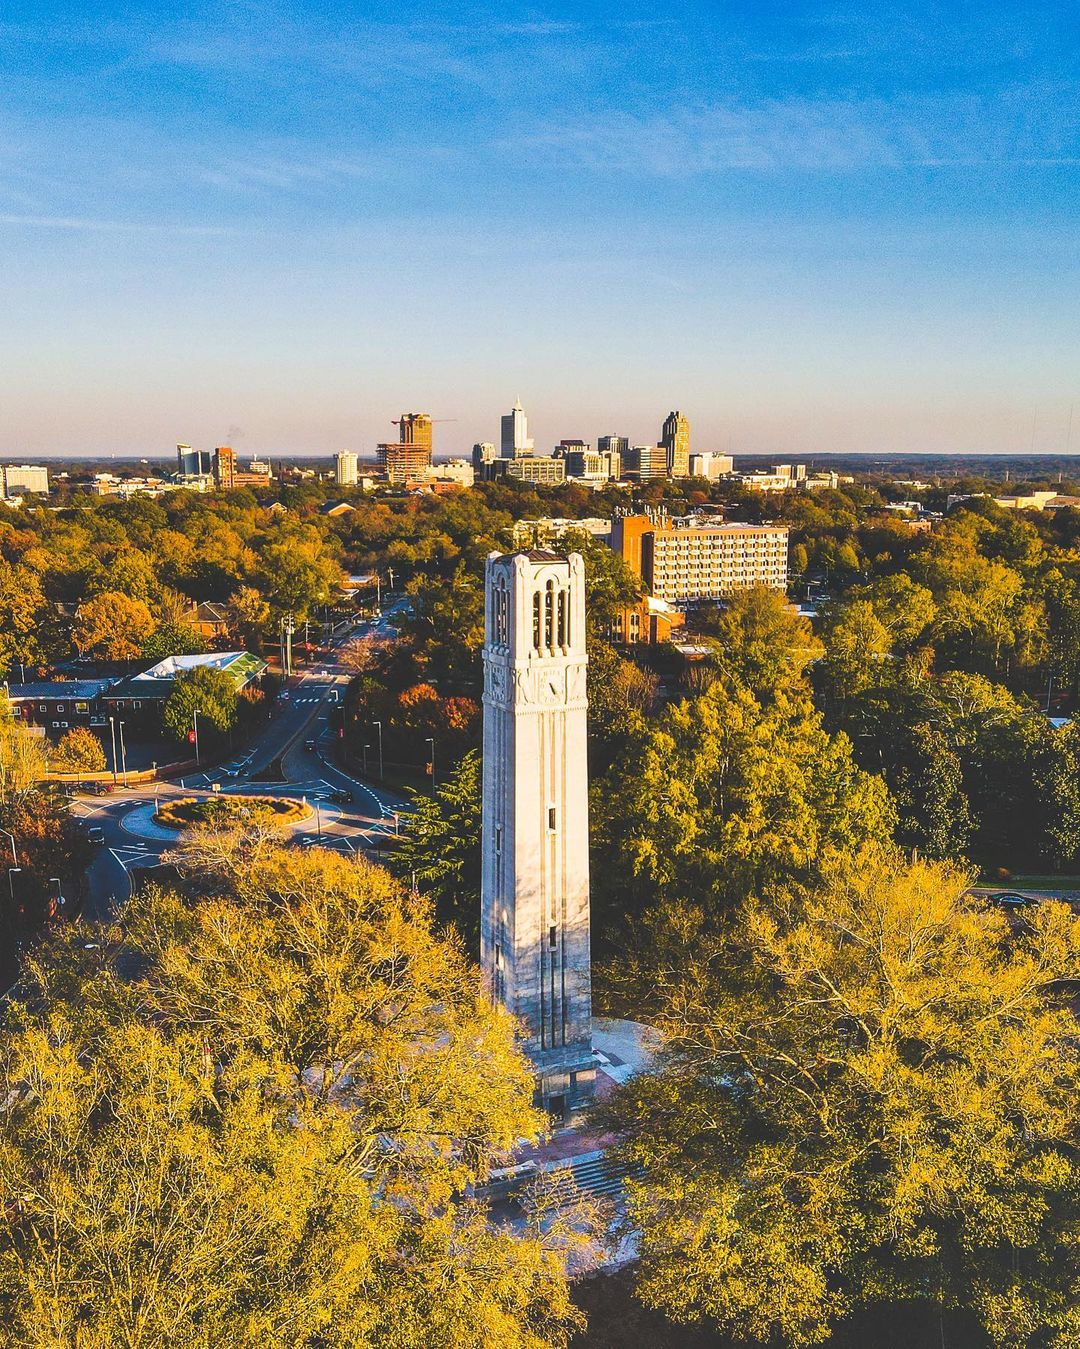 Aerial view of NC State campus clock tower. Photo by Instagram user @jonathan.mcrae